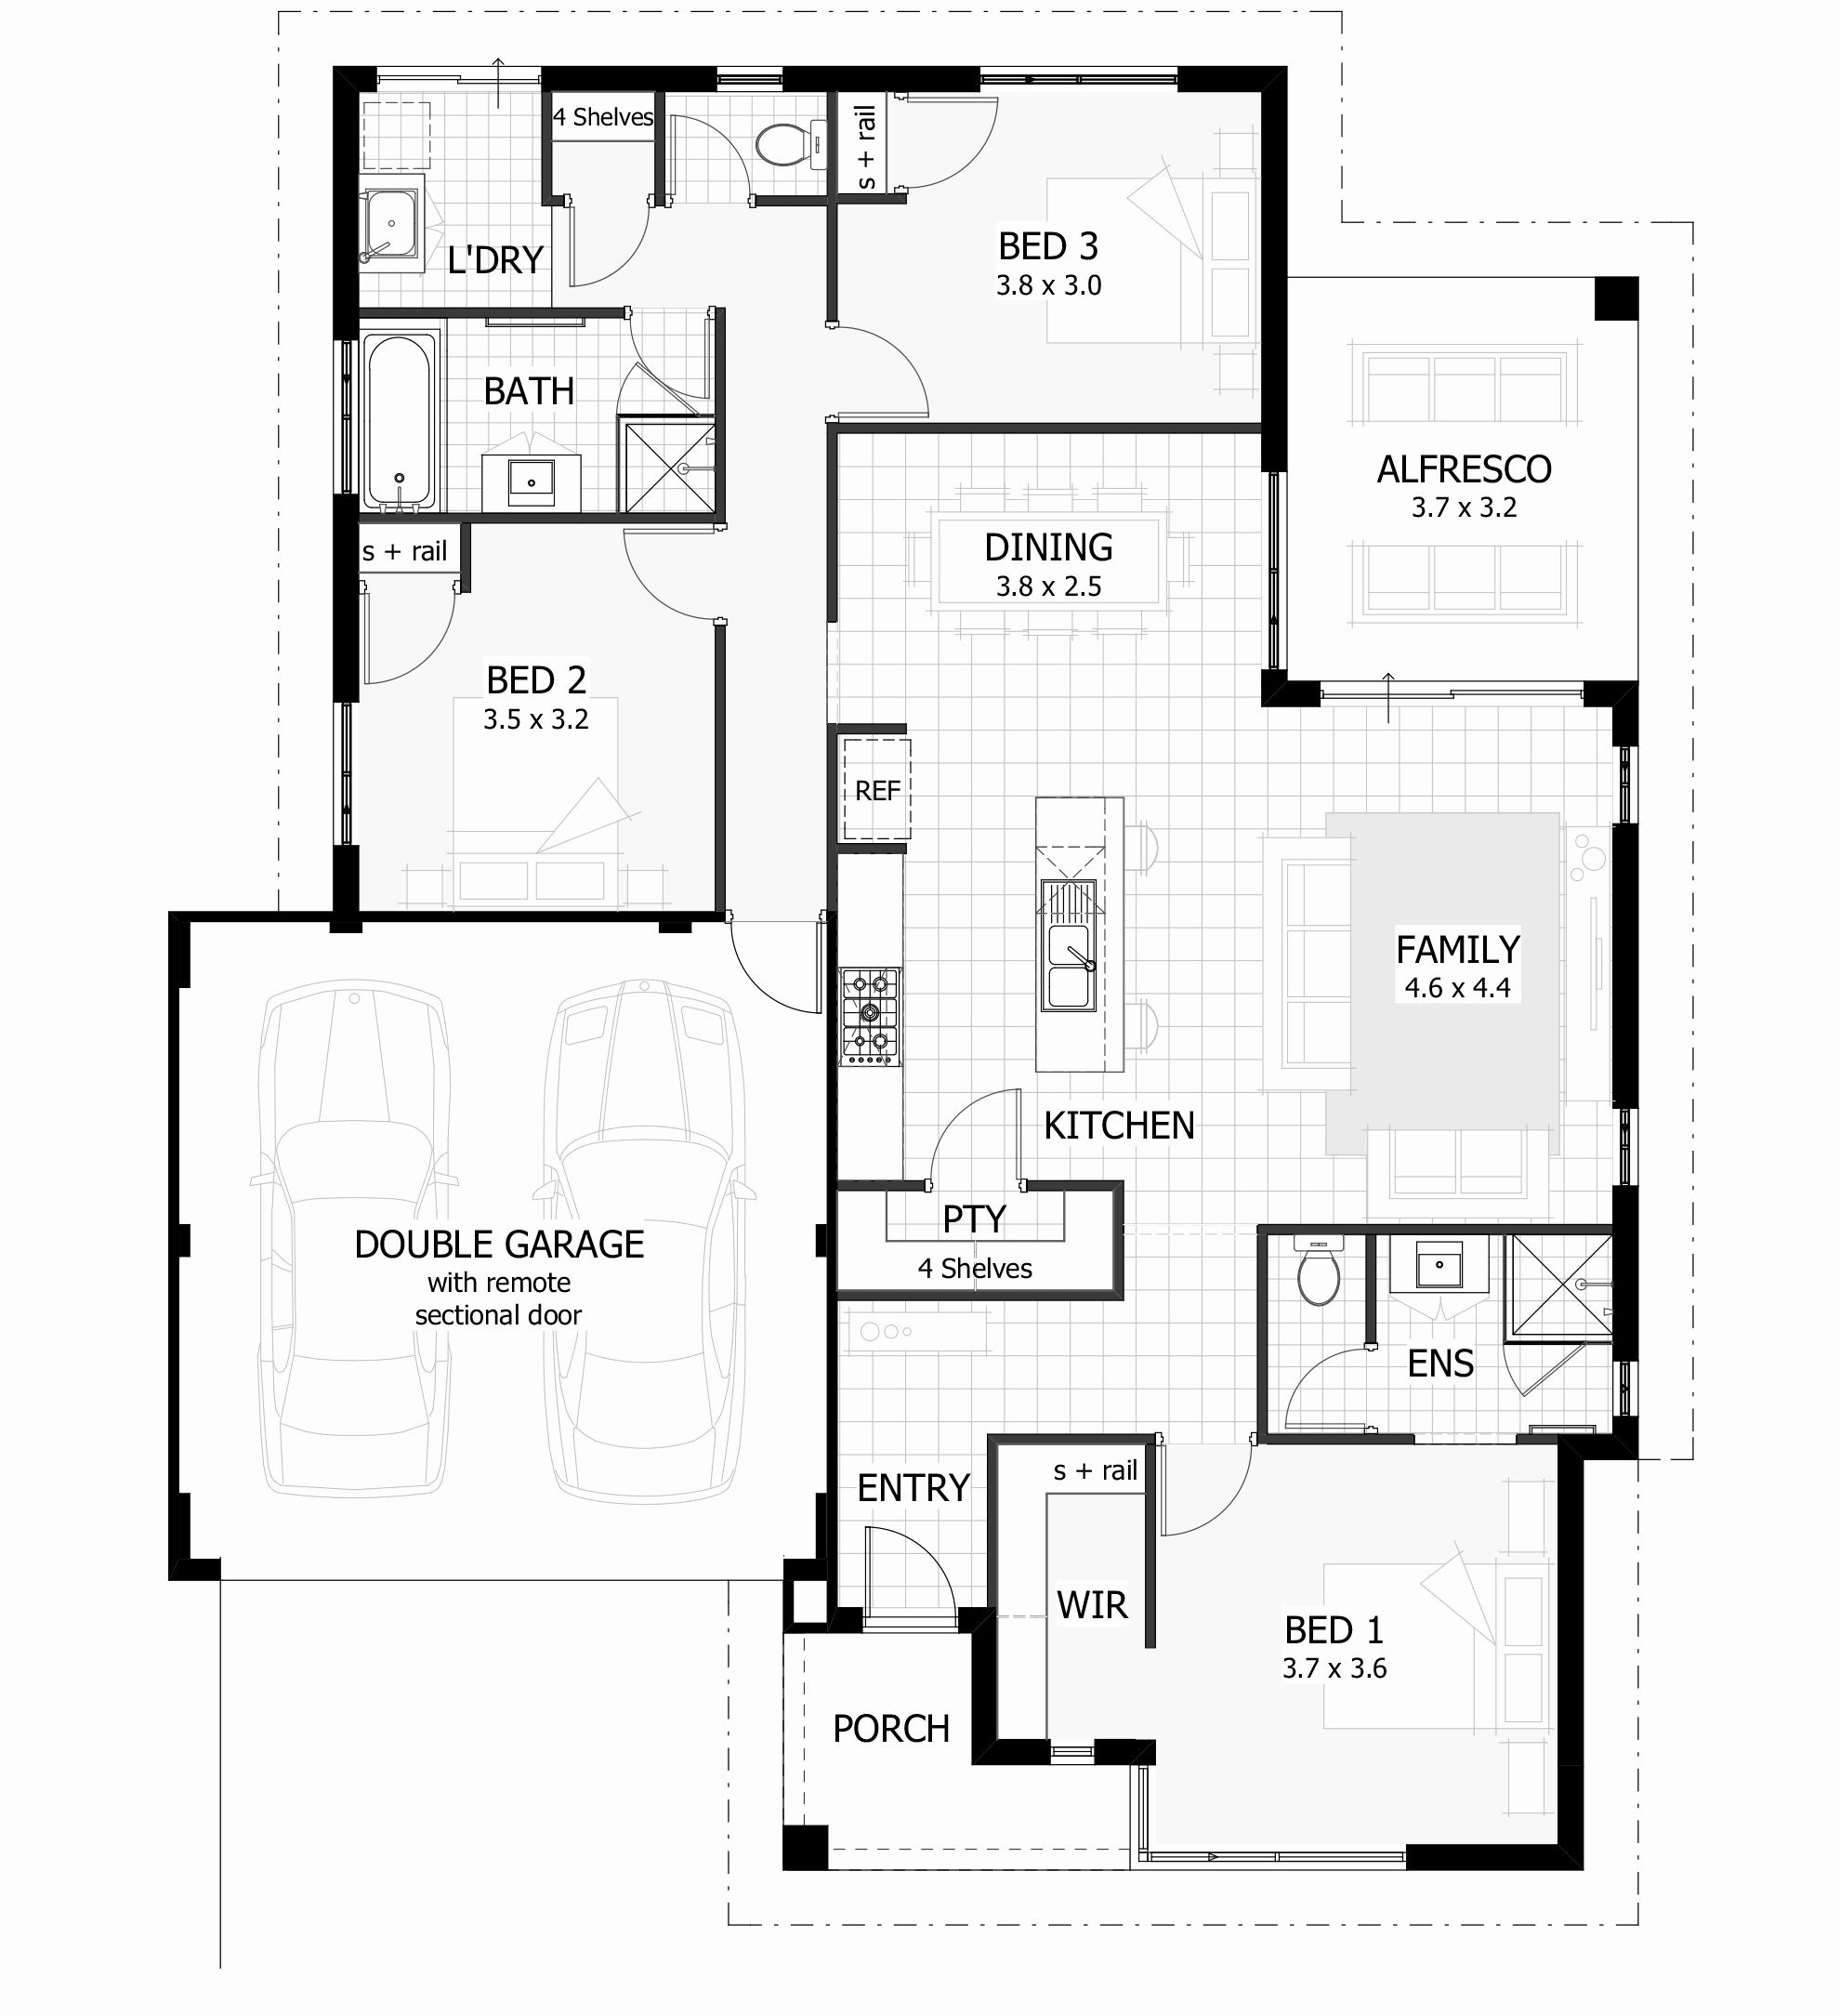 Incredible 3 bedroom 2 bathroom house designs | bedroom house plans, modular home pertaining to plan of house with 3 bed rooms